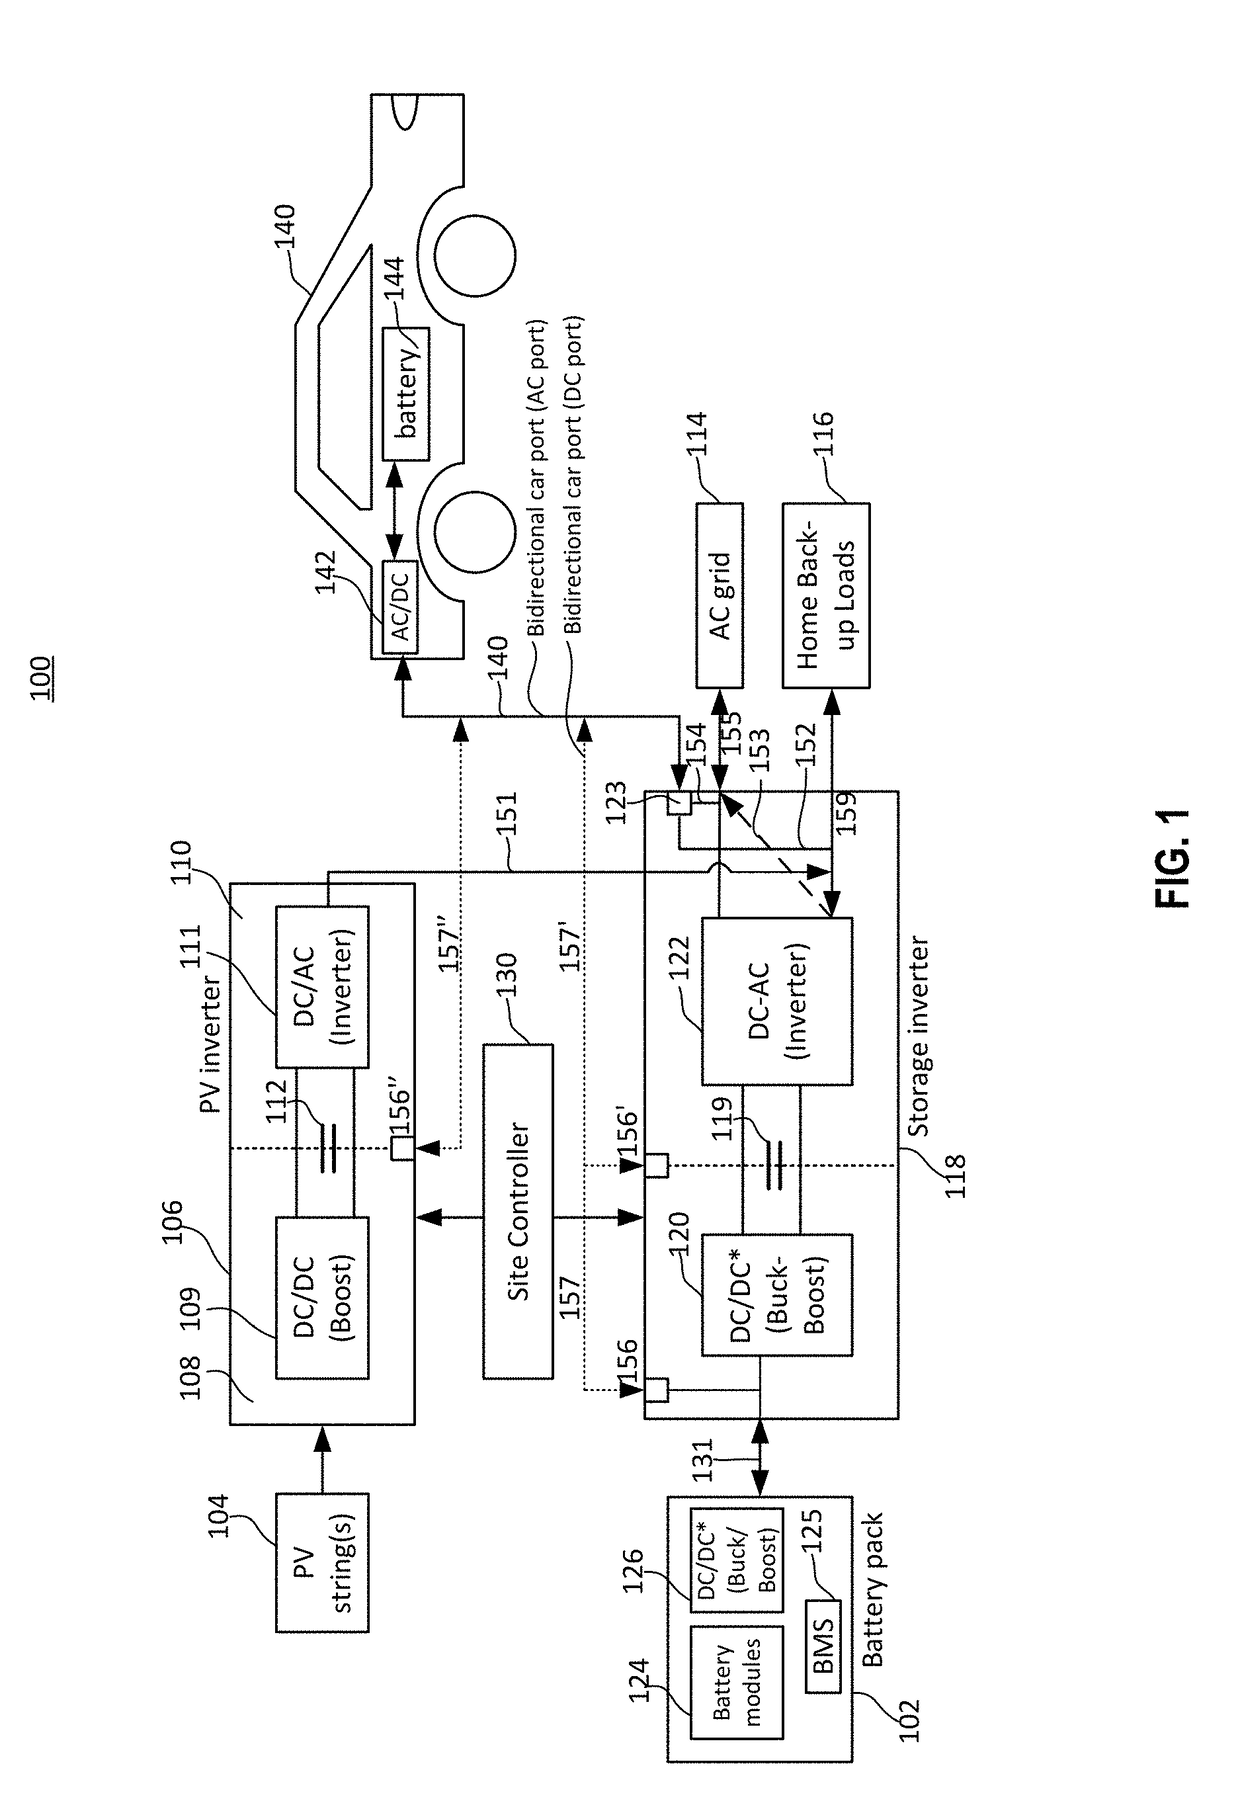 Energy generation and storage system with electric vehicle charging capability